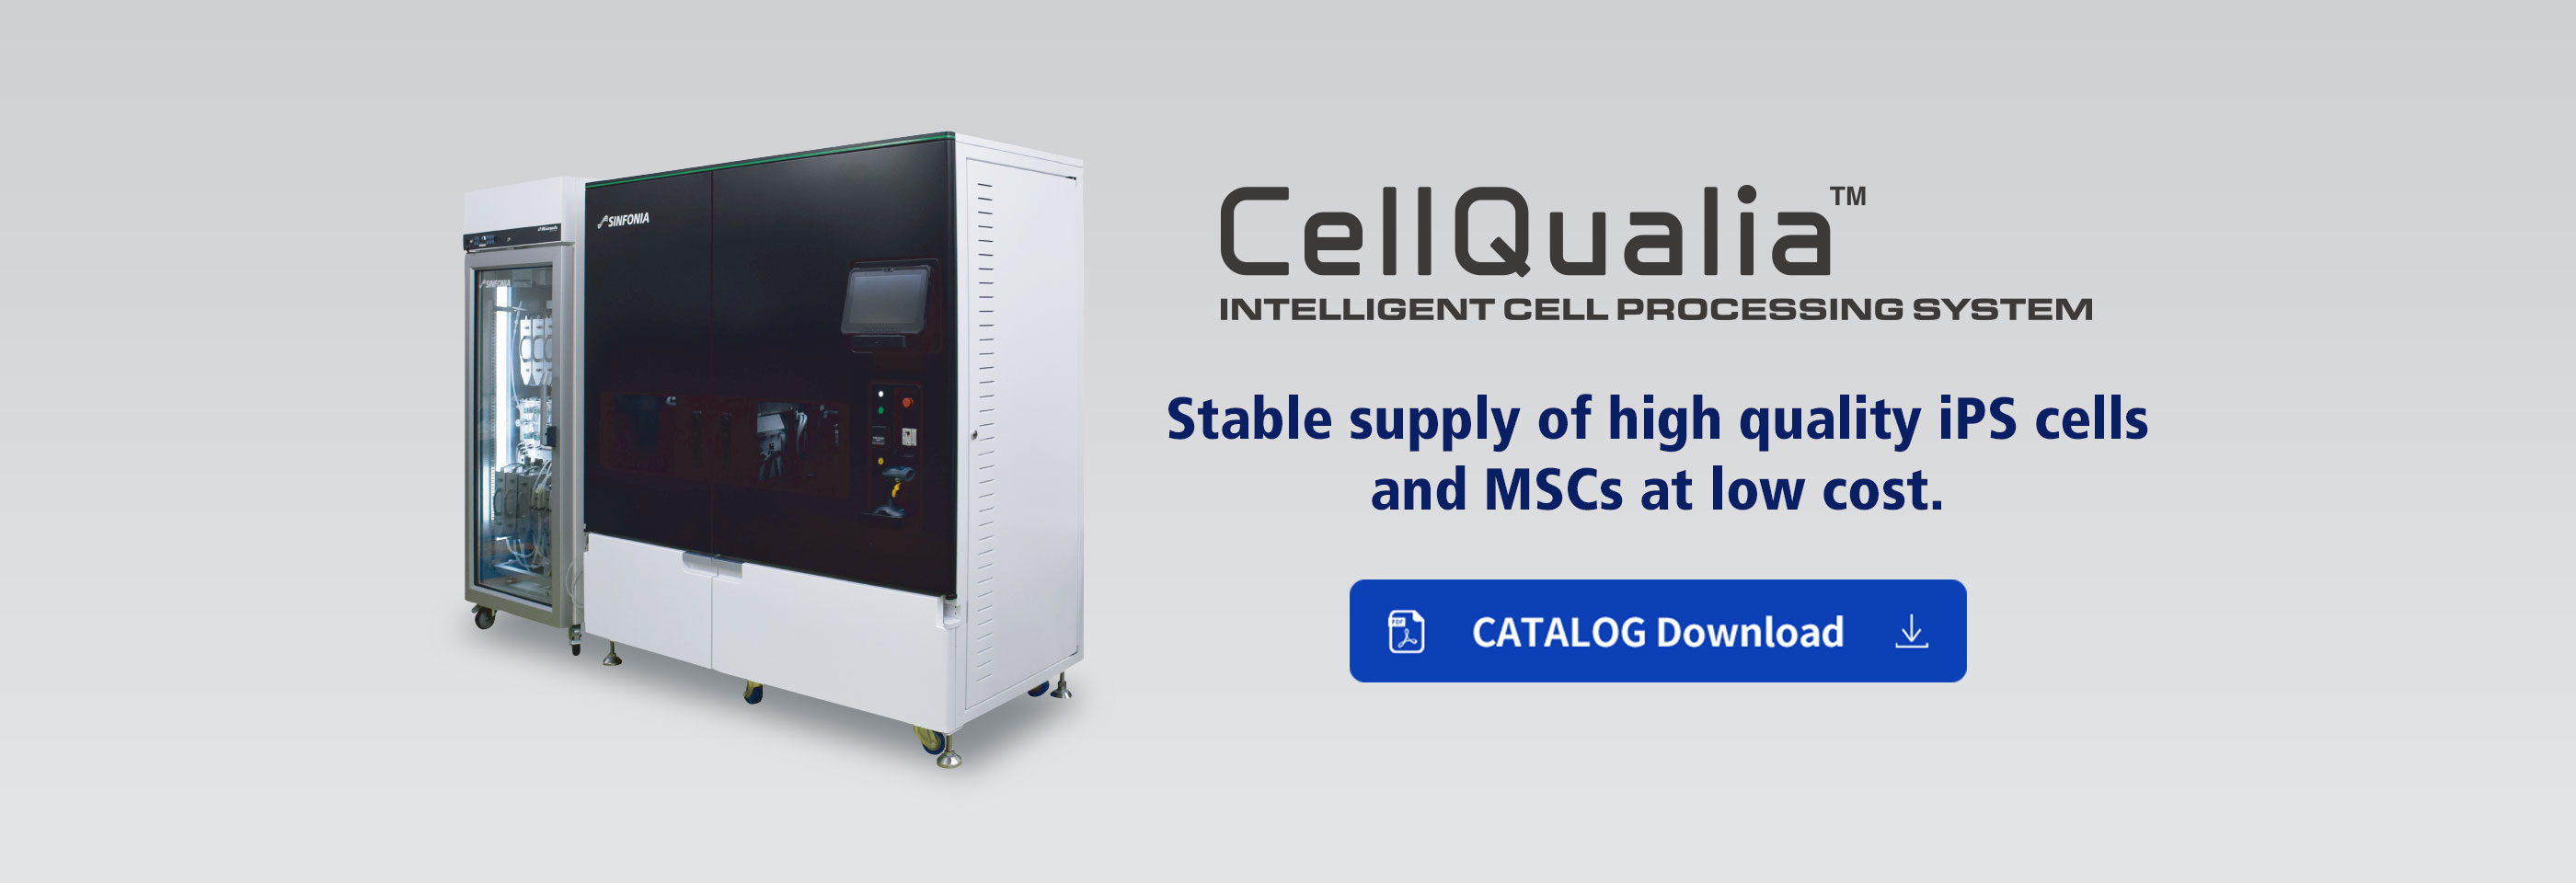 CellQualia INTELLIGENT CELL PROCESSING SYSTEM